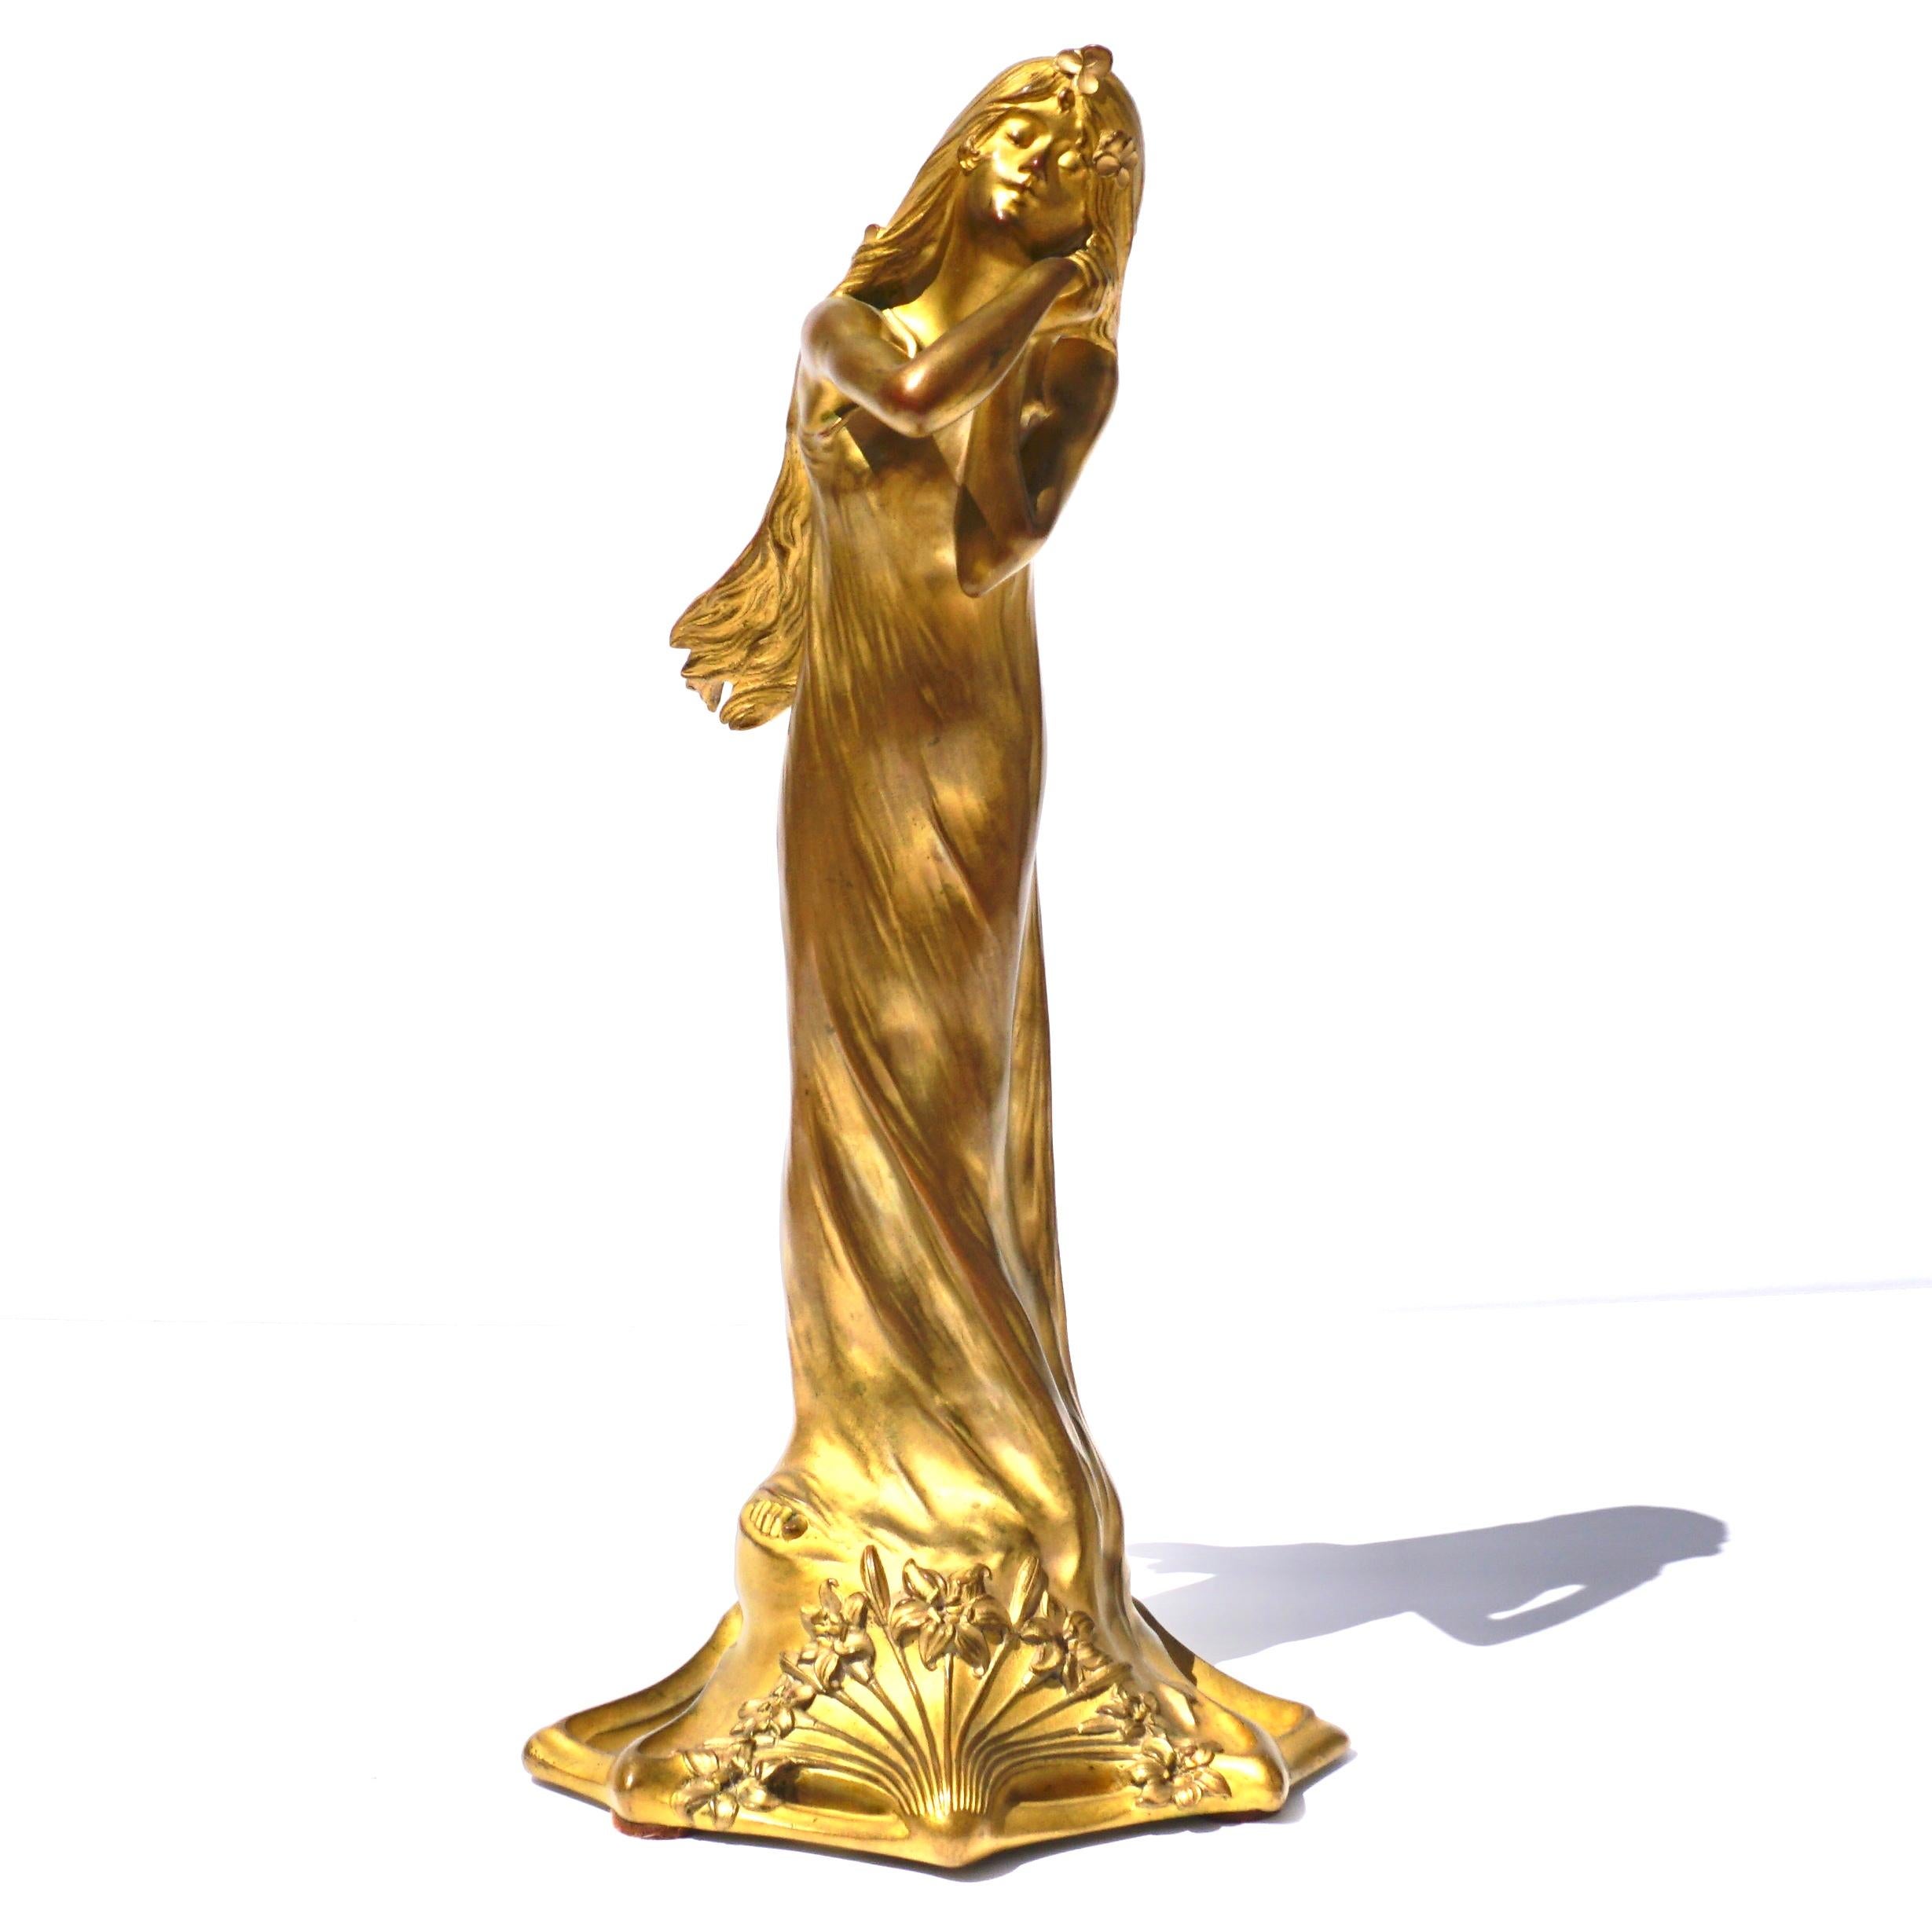 Charles Raphaël Peyre (French 1874-1949)

A French Art Nouveau Gilt-Bronze Figure of a Maiden
Cast by Louchet, circa 1900
Modeled in a standing pose with her hands clasped closed to her cheek, inscribed Peyre and stamped with the foundry seal.